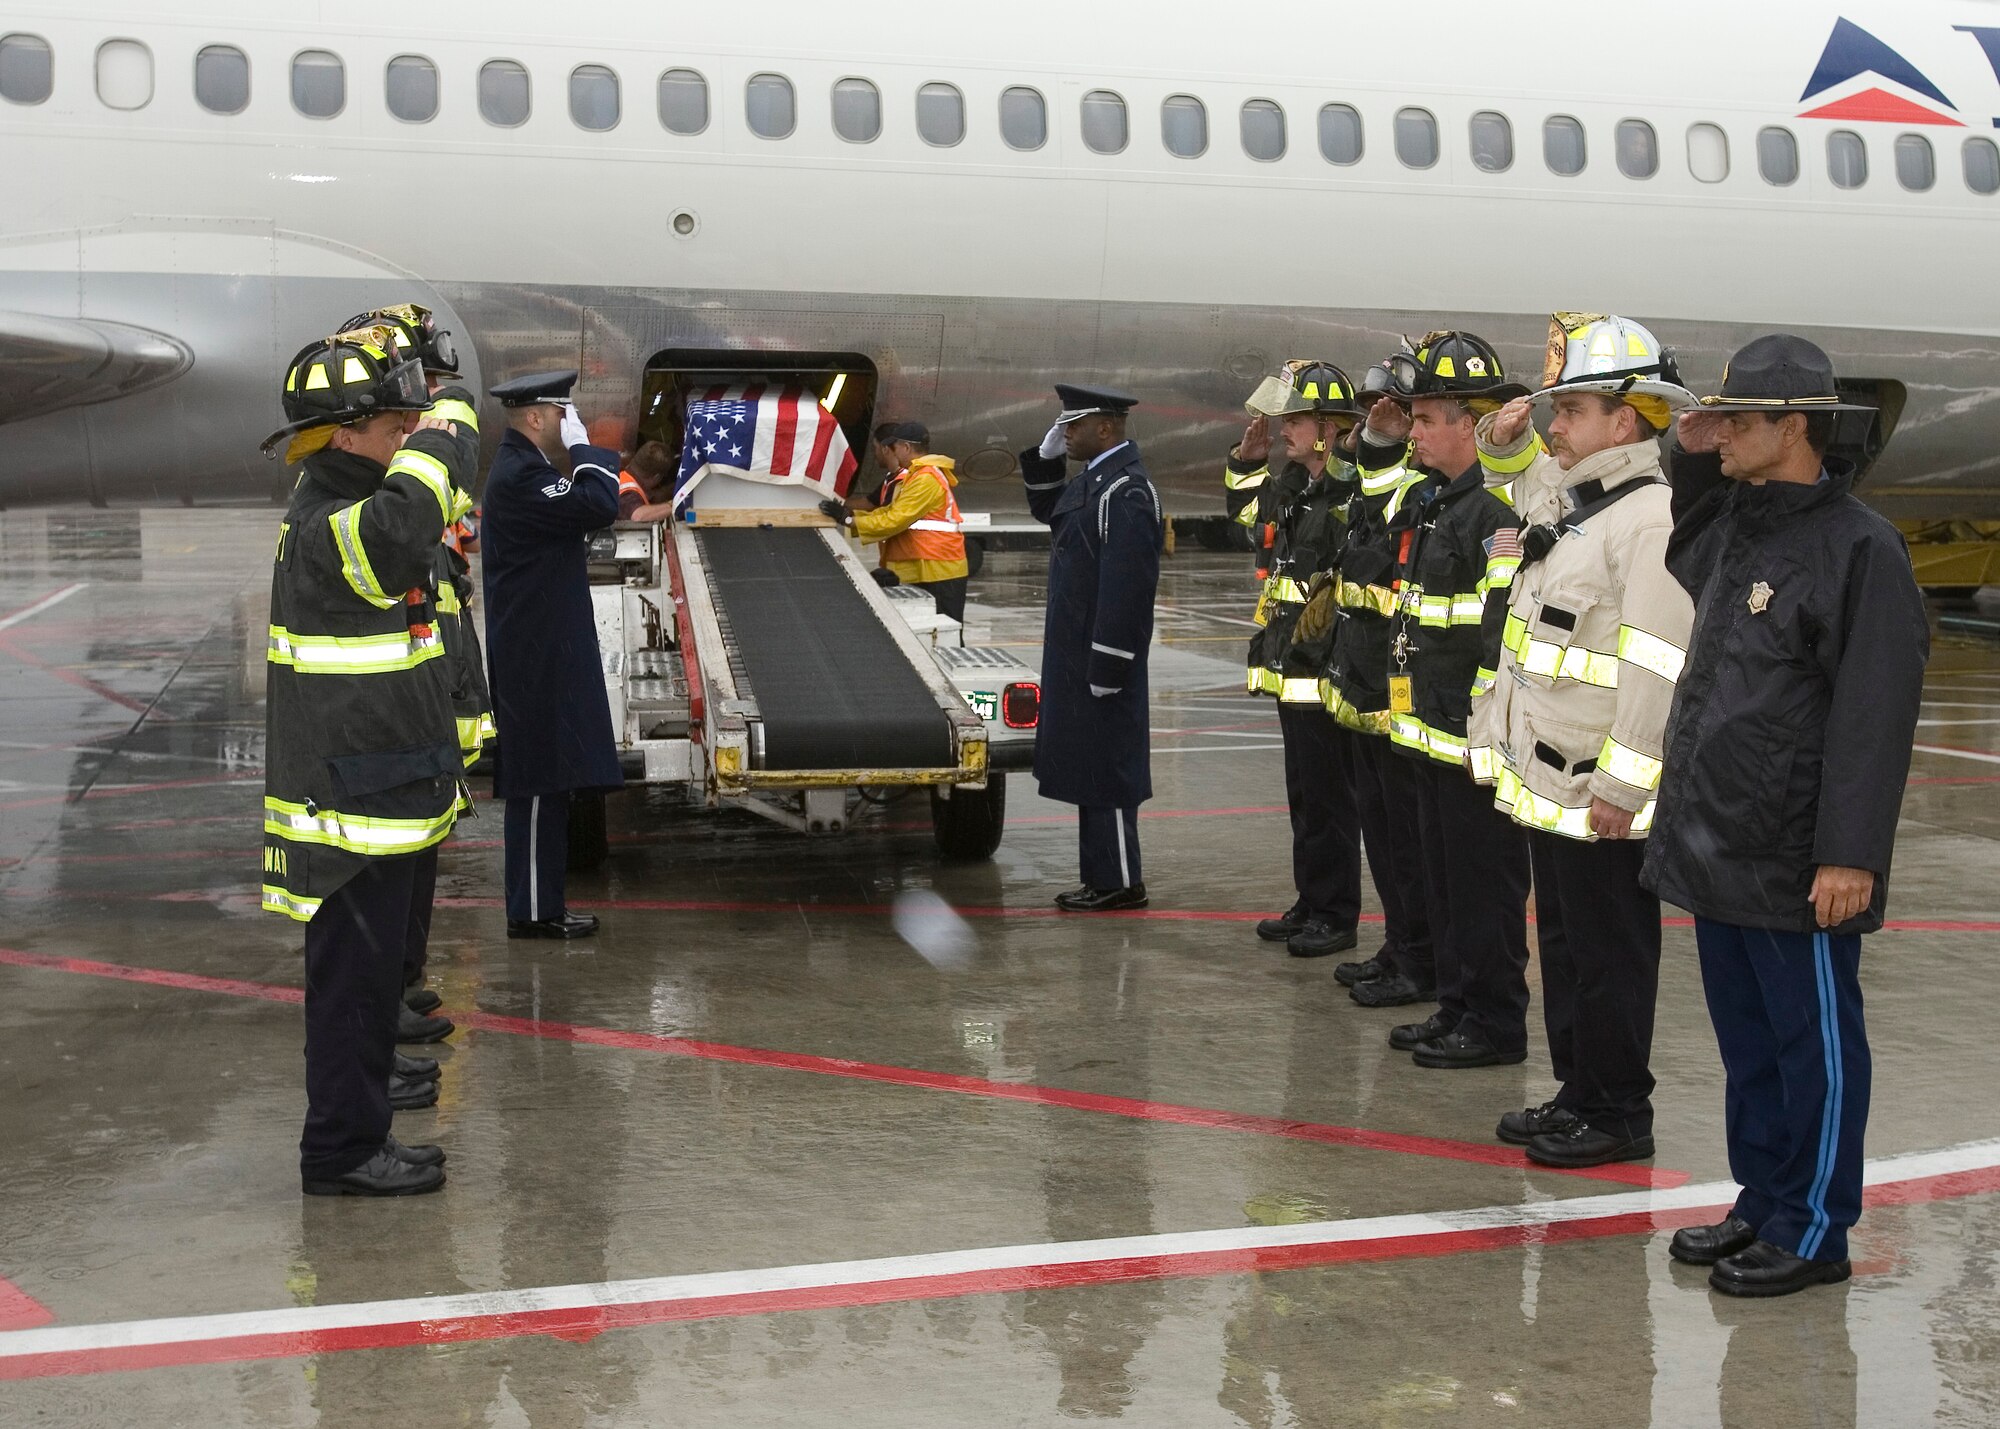 HANSCOM AFB, Mass. -- From left, nearest to airplane ramp, Patriot Honor Guard Staff Sgts. Philip Pelletier and Lucien Blake render salutes as the remains of Staff Sgt. Donald Michaud are lowered from a Delta Airlines jet at Logan Airport. Joining the sergeants are members of the Logan Airport Fire Department and a member of the Massachusetts State Police. (U.S. Air Force photo by David Turner)